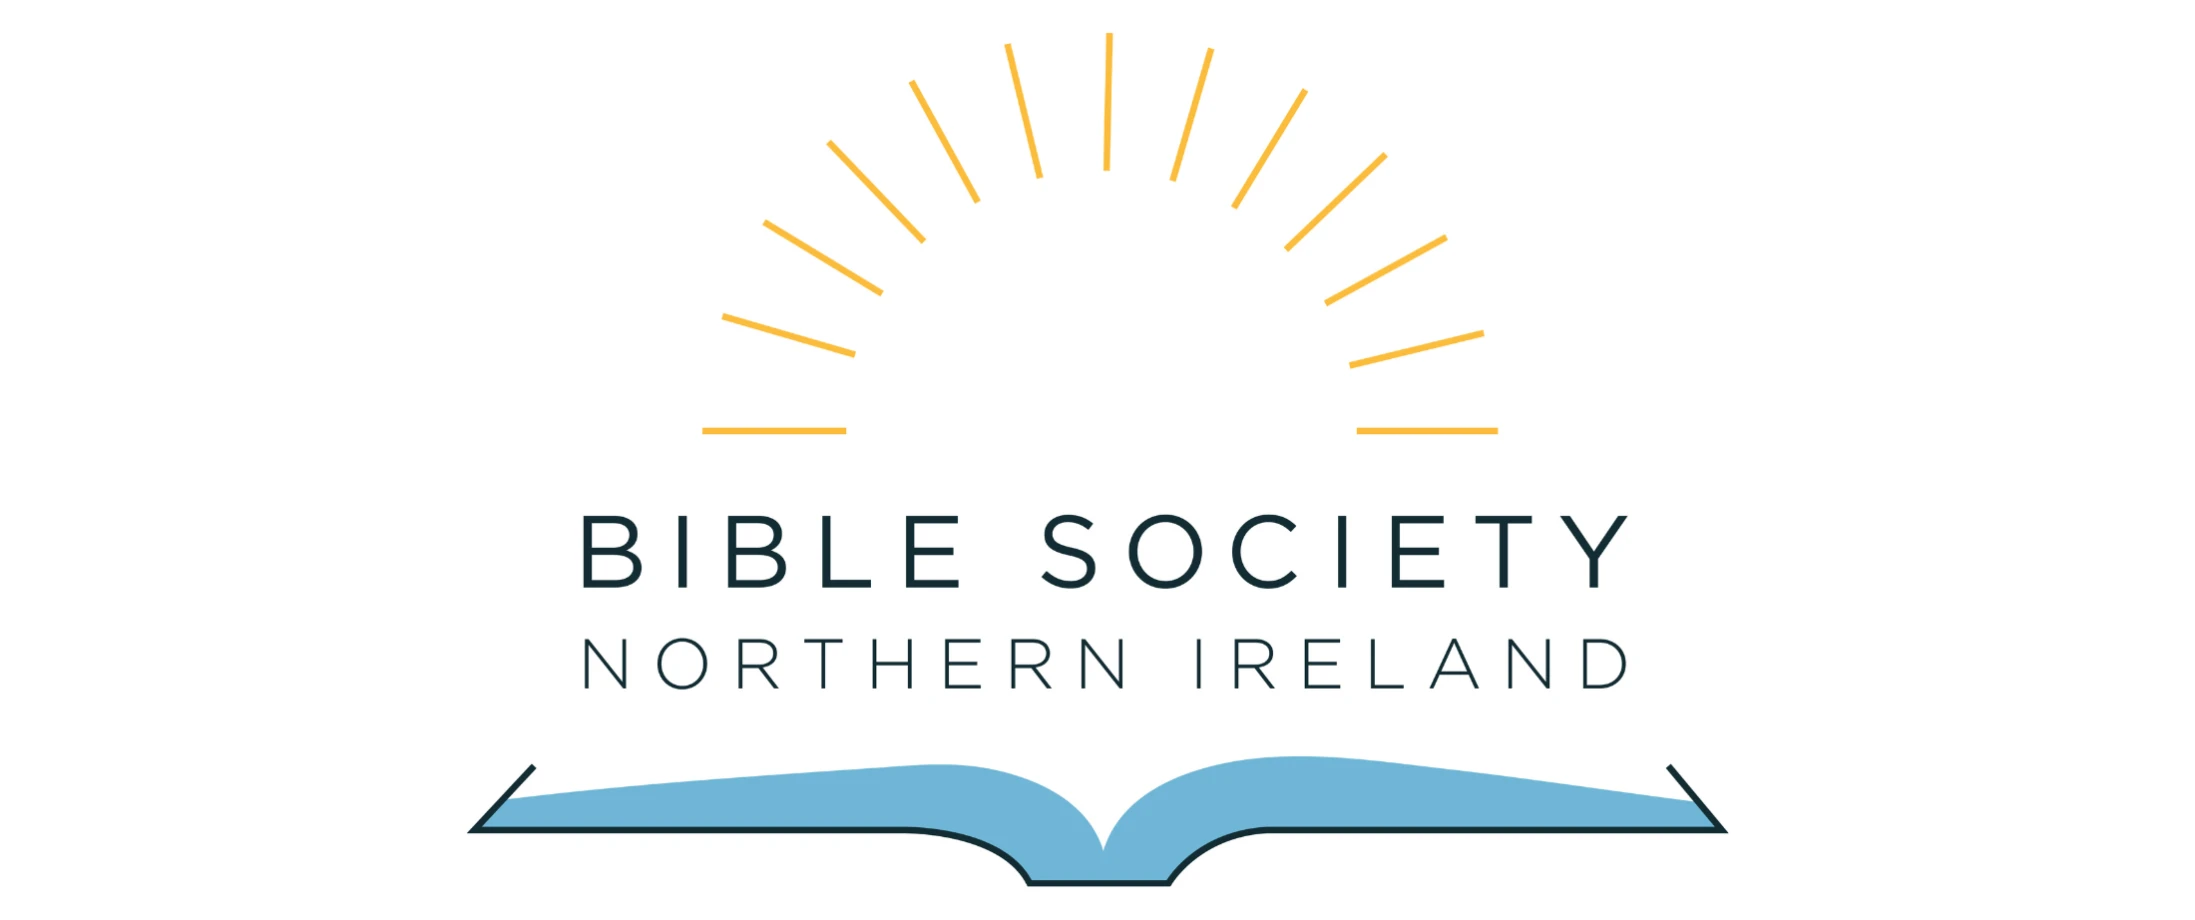 Chief Executive Officer, The Bible Society in Northern Ireland